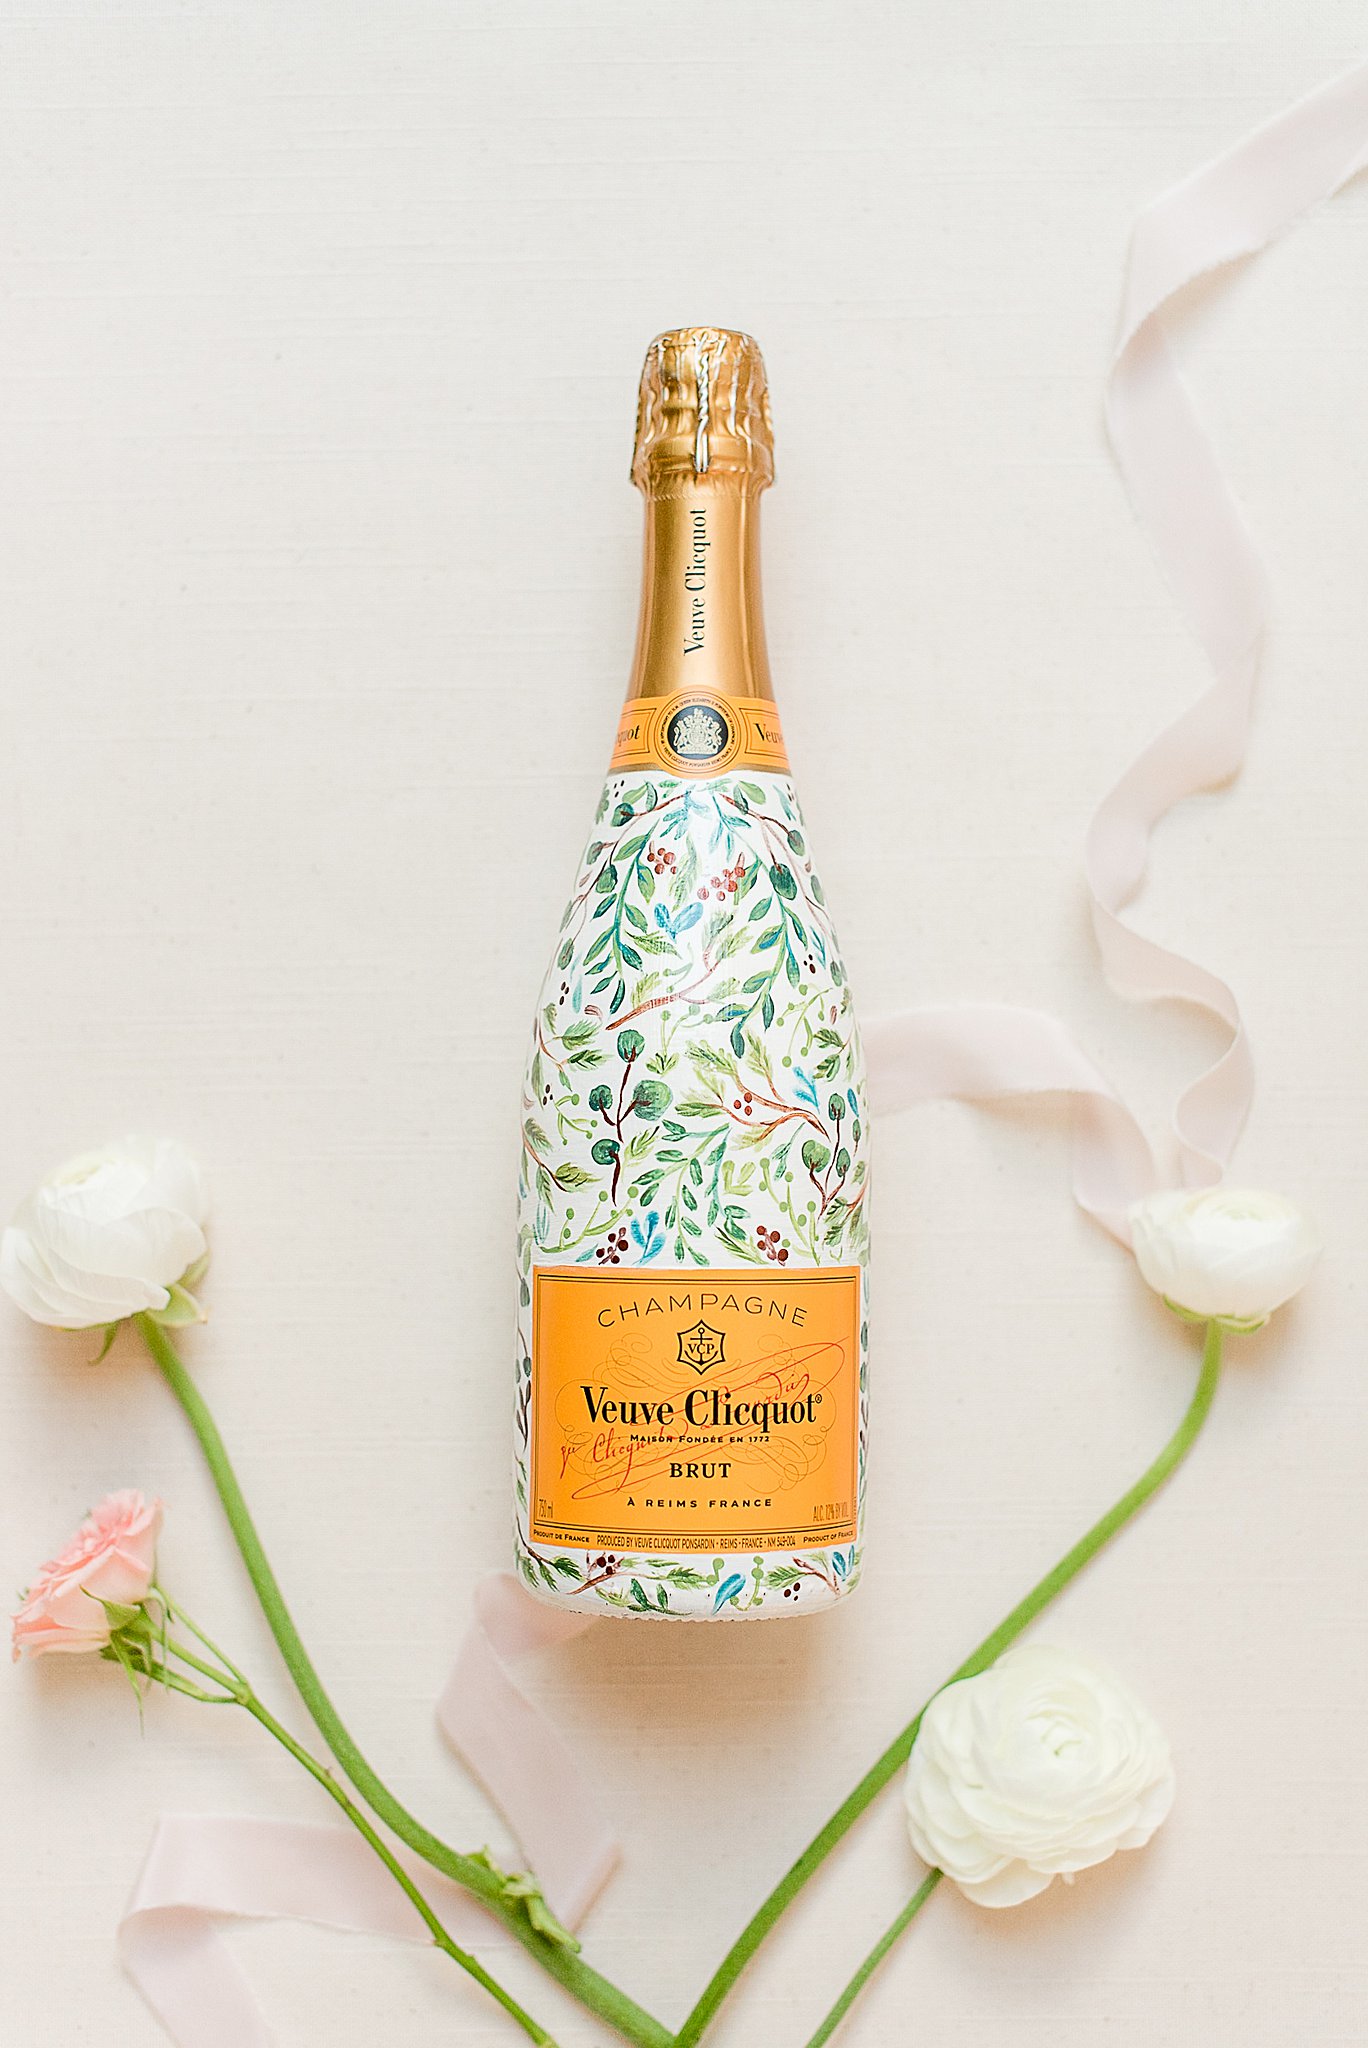 A bottle of colorful champagne lays on a table with white and pink flowers